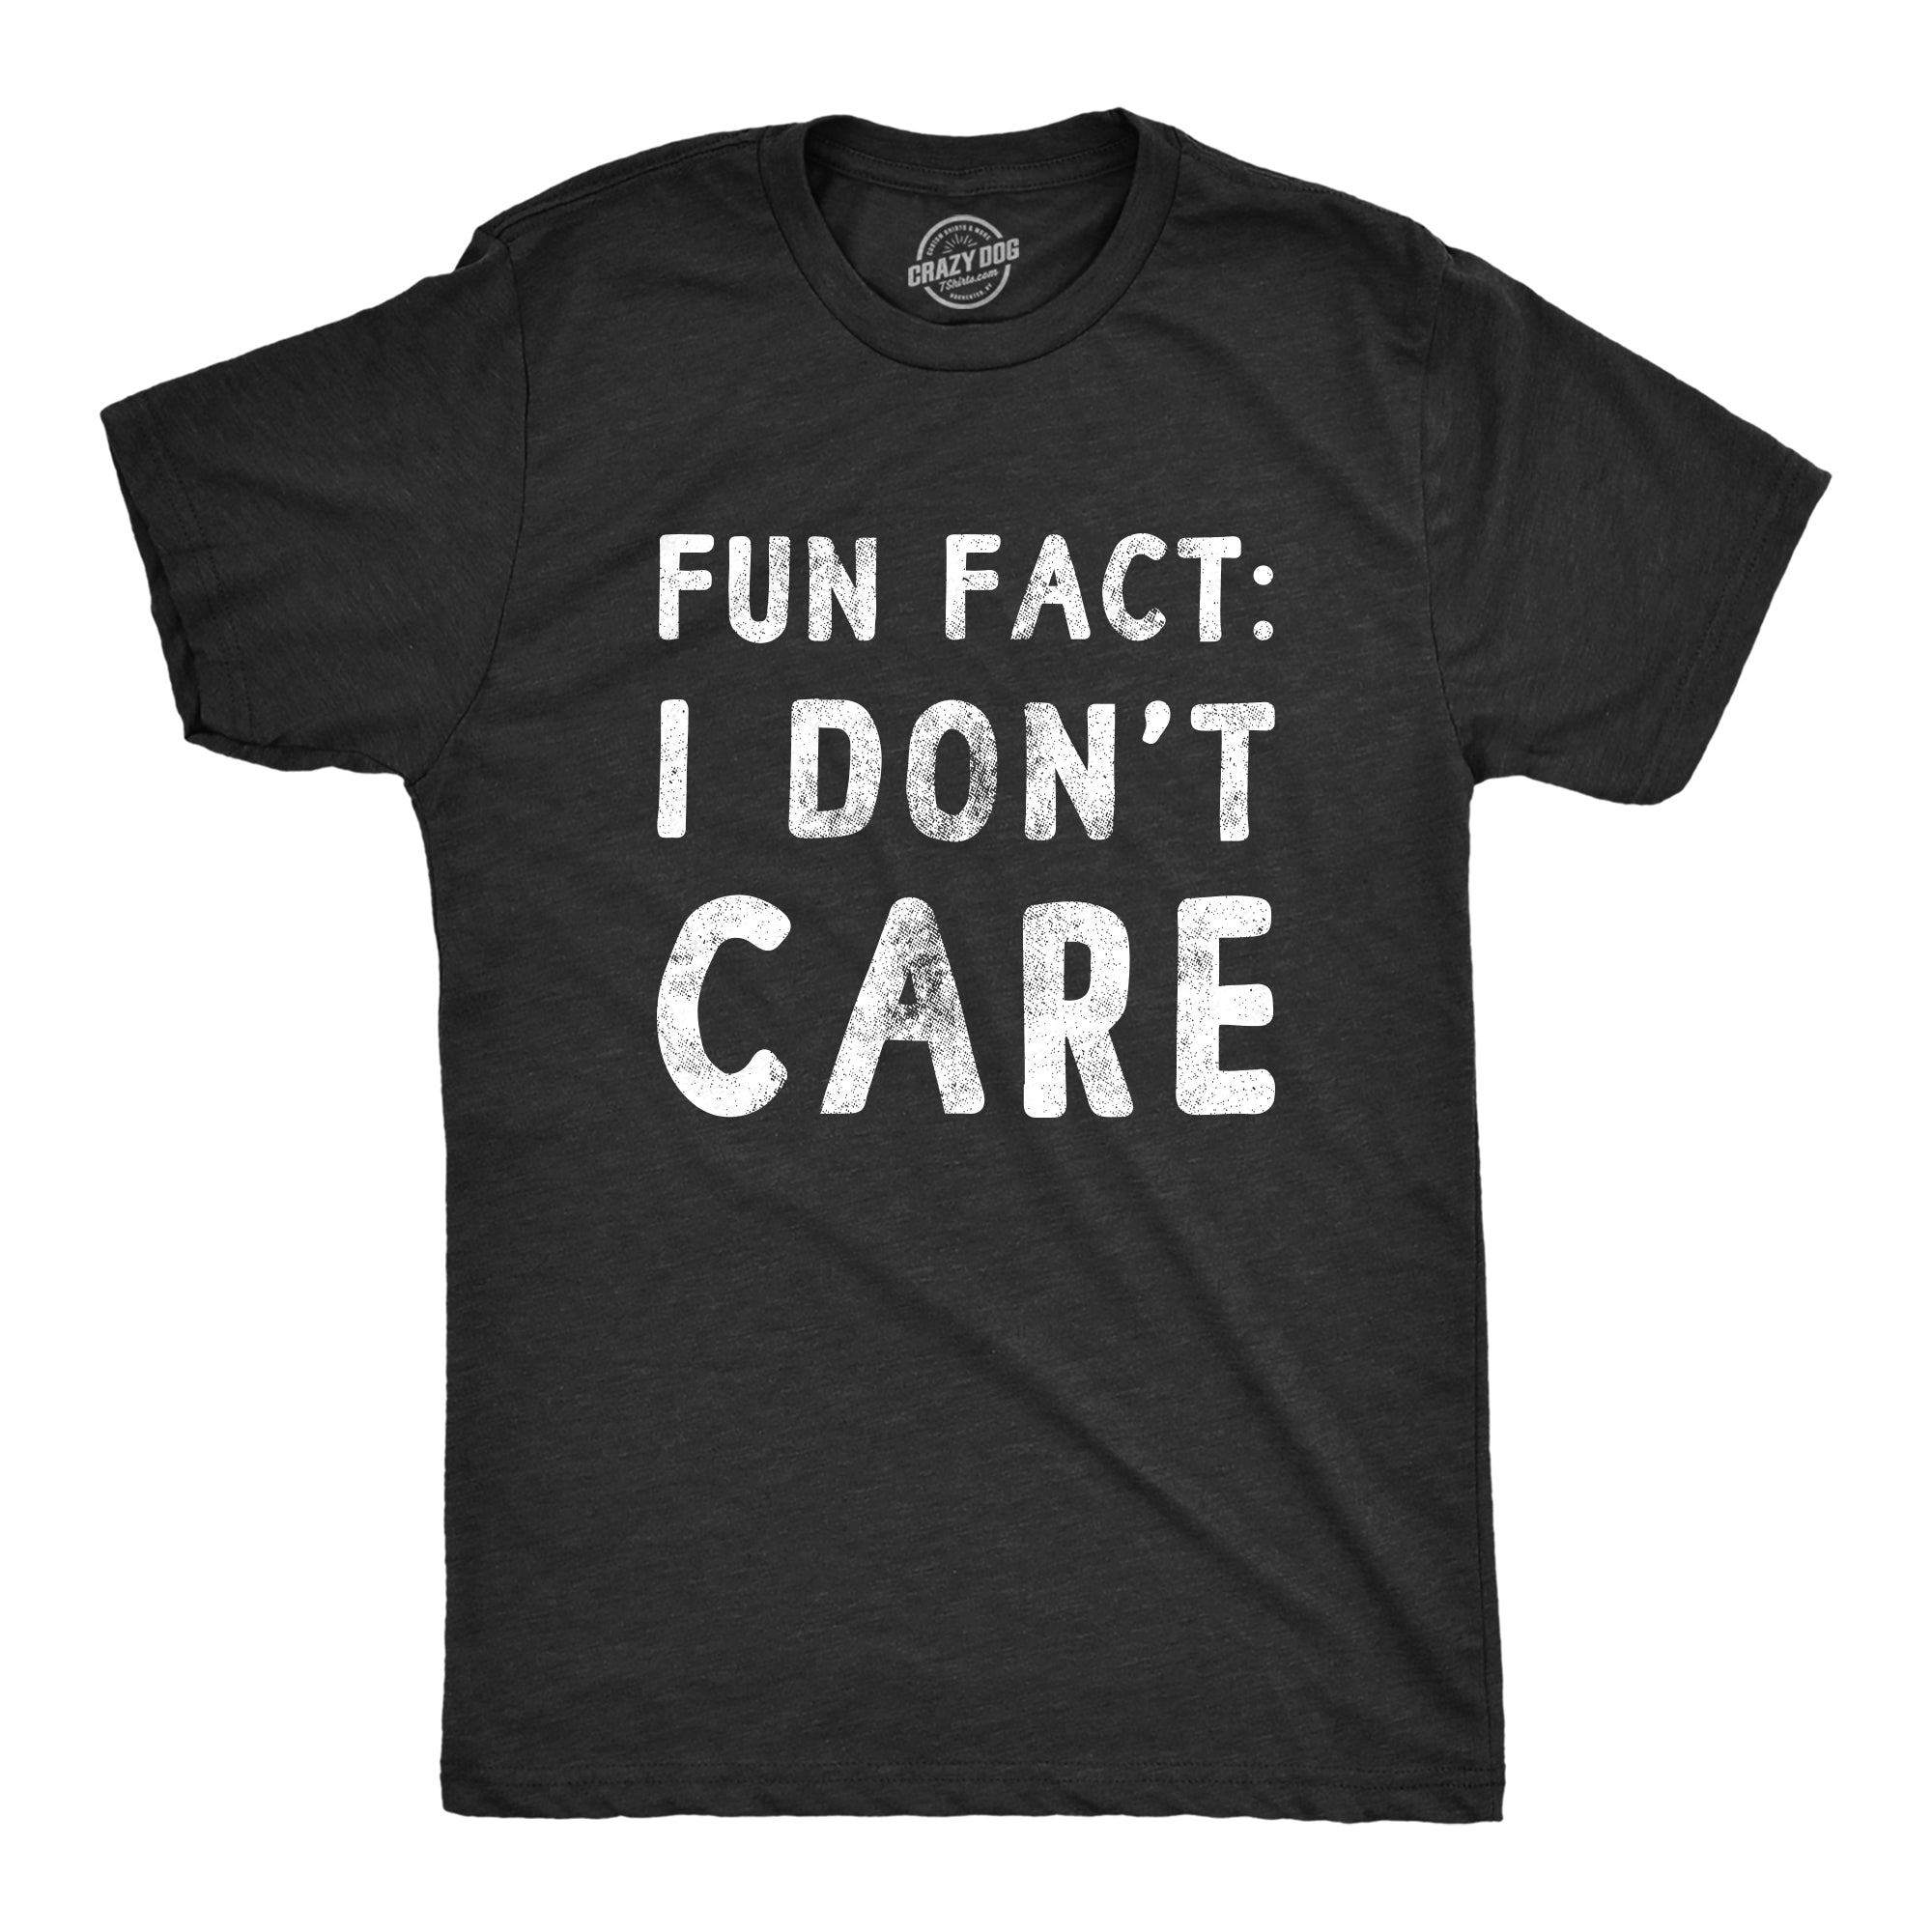 Funny Heather Black Fun Fact I Don’t Care Mens T Shirt Nerdy Introvert Tee